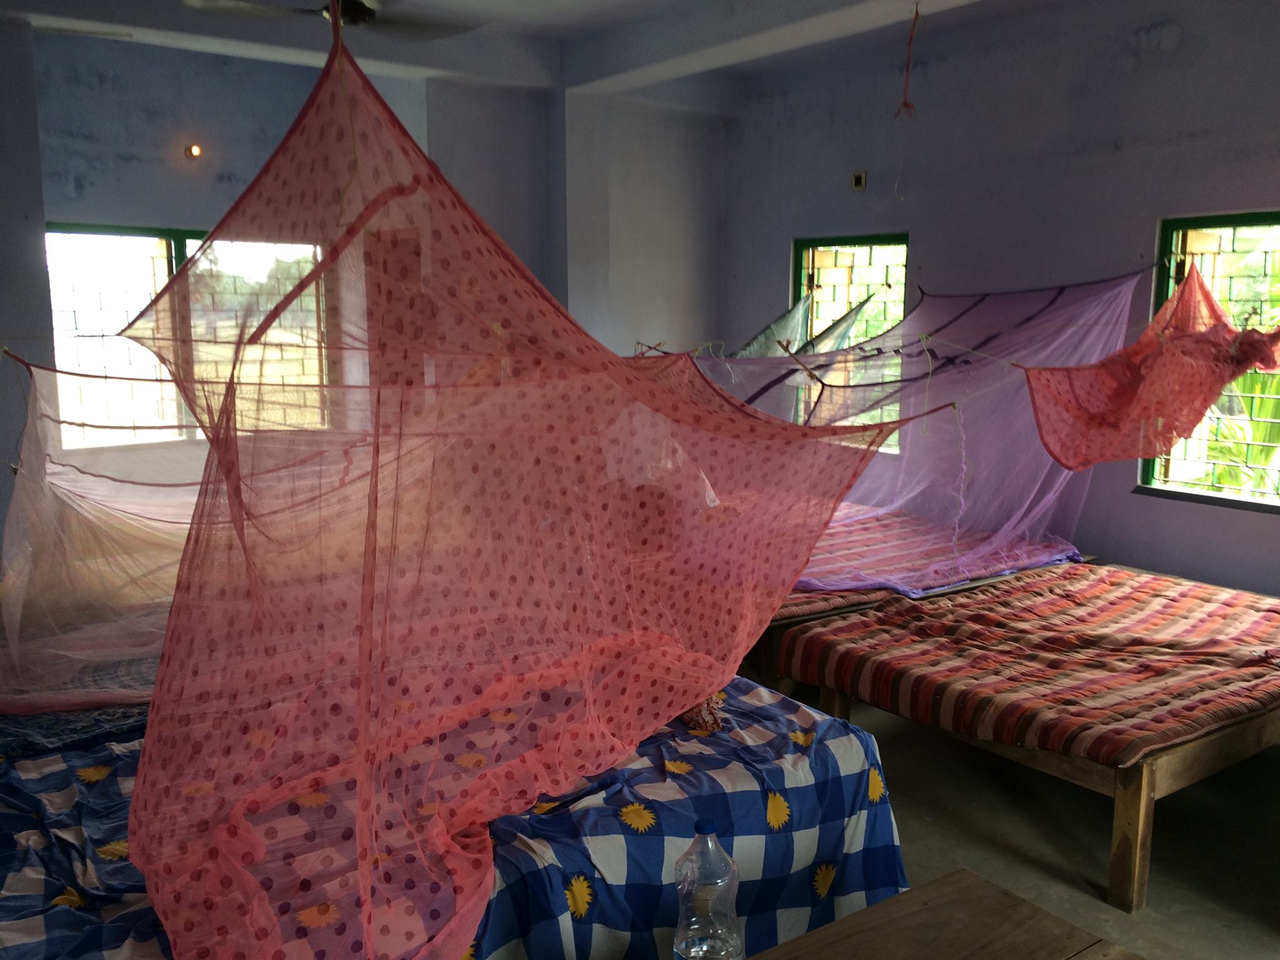 Bedroom with nets over the beds